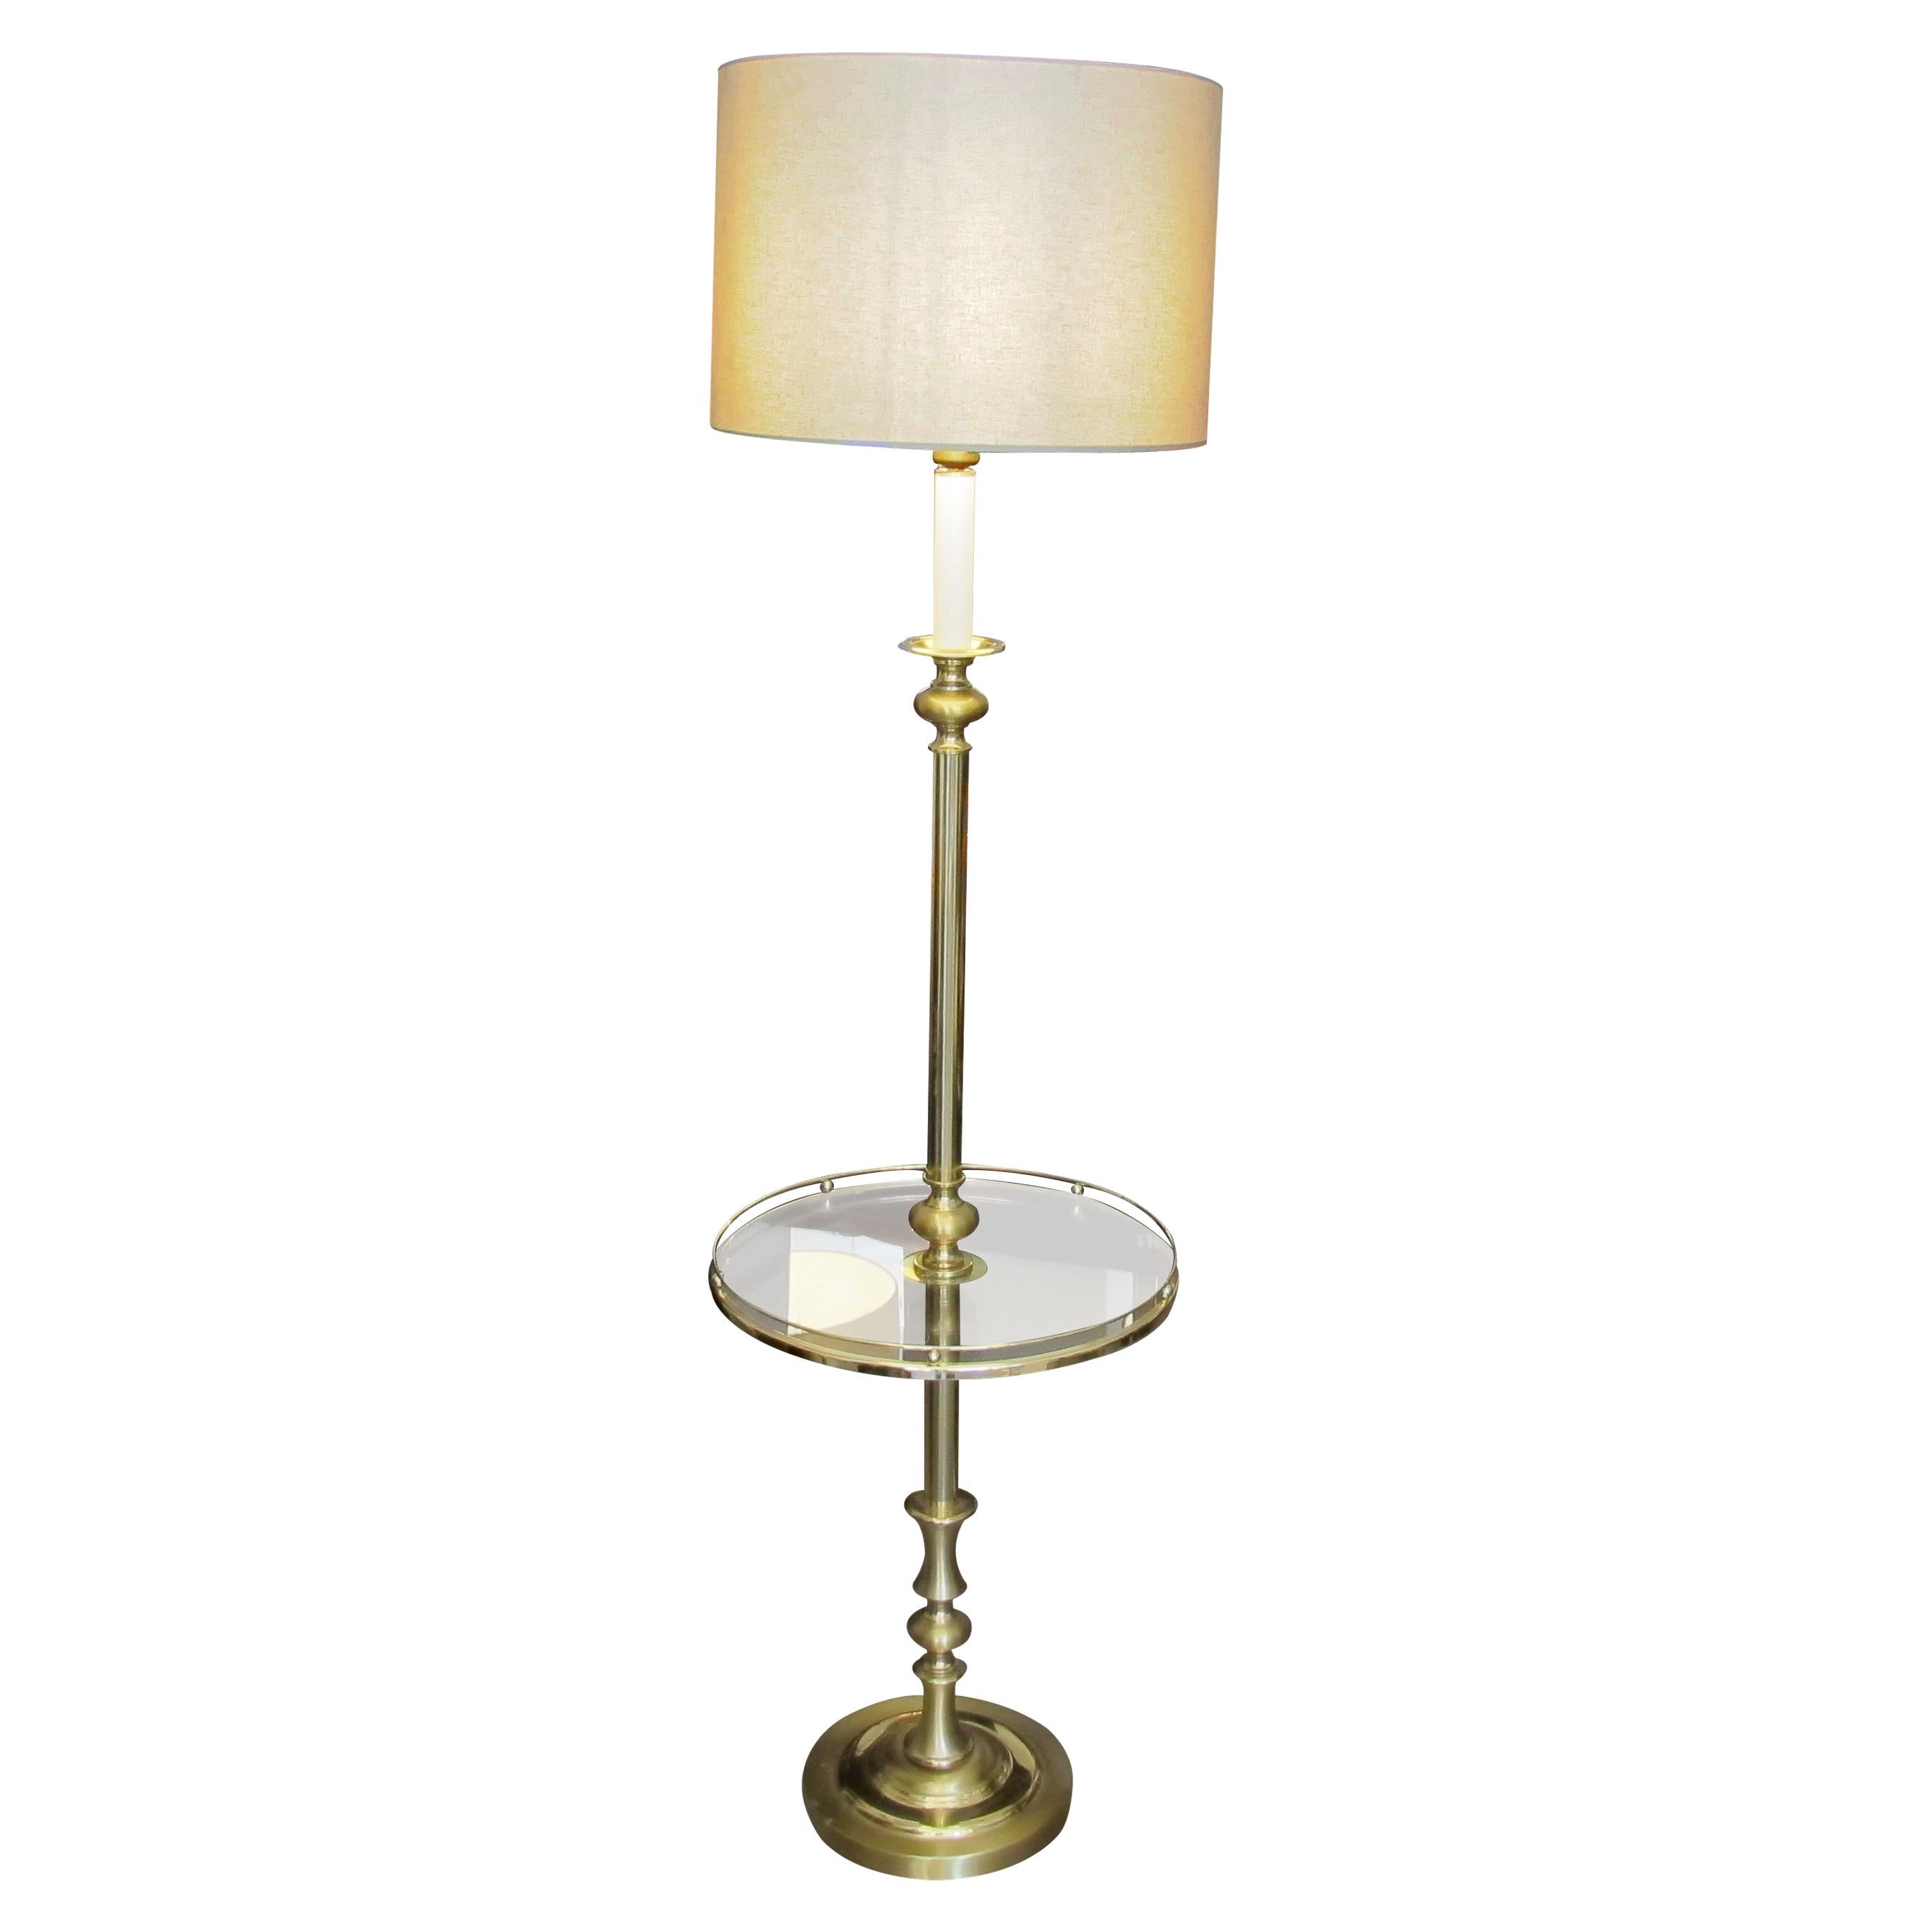 Mid-Century Modern 1970s Pair of Brass Floor Lamps with Integrated Side Tables, Swedish For Sale